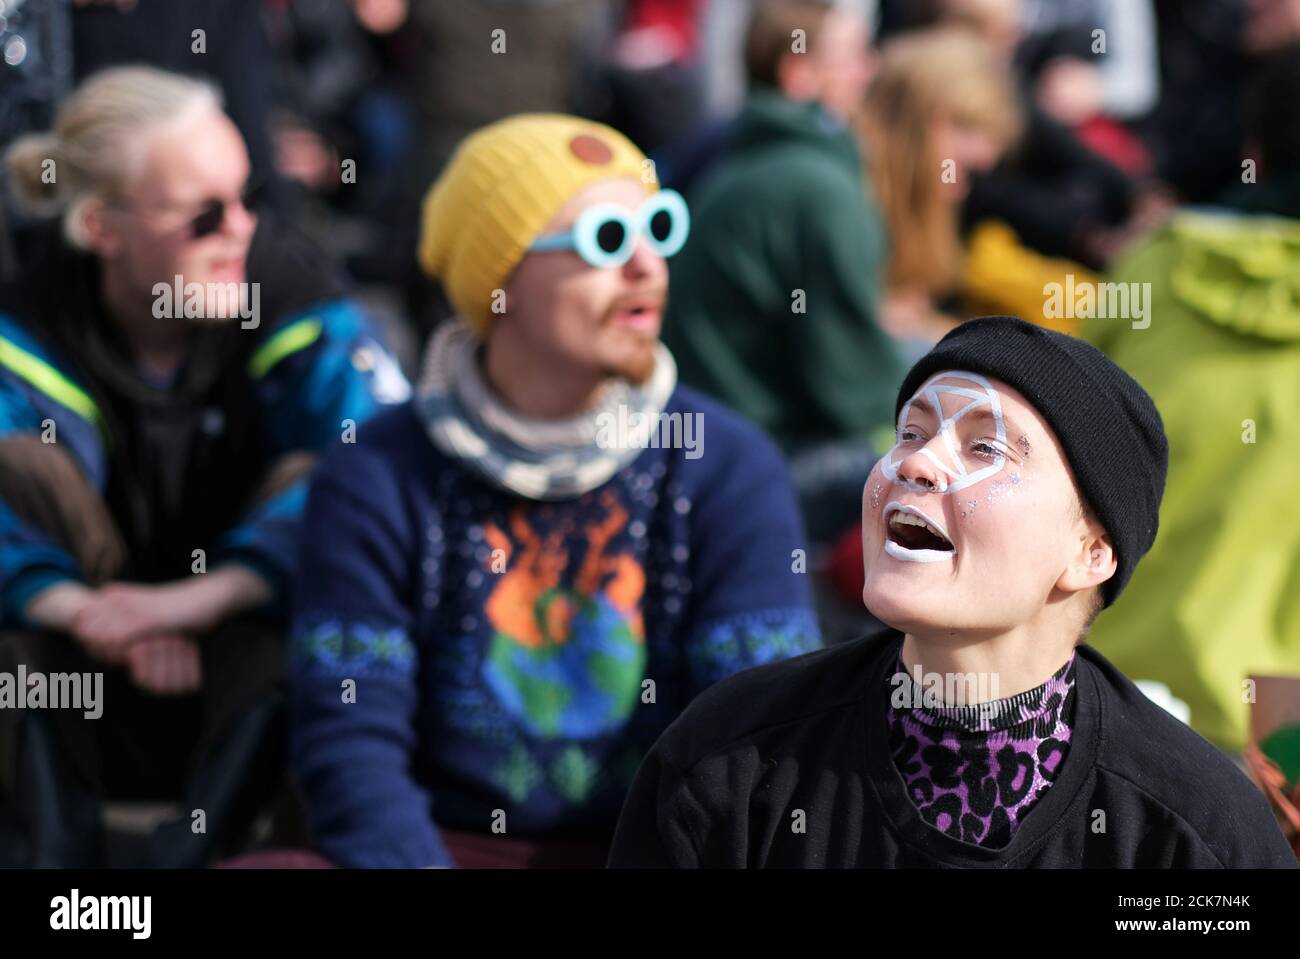 A protester with the extinction symbol painted on her face participates in the Extinction Rebellion's blockade of the Muhlendamm Bridge during the launch of a new wave of civil disobedience in Berlin, Germany October 9, 2019.  REUTERS/Christian Mang Stock Photo